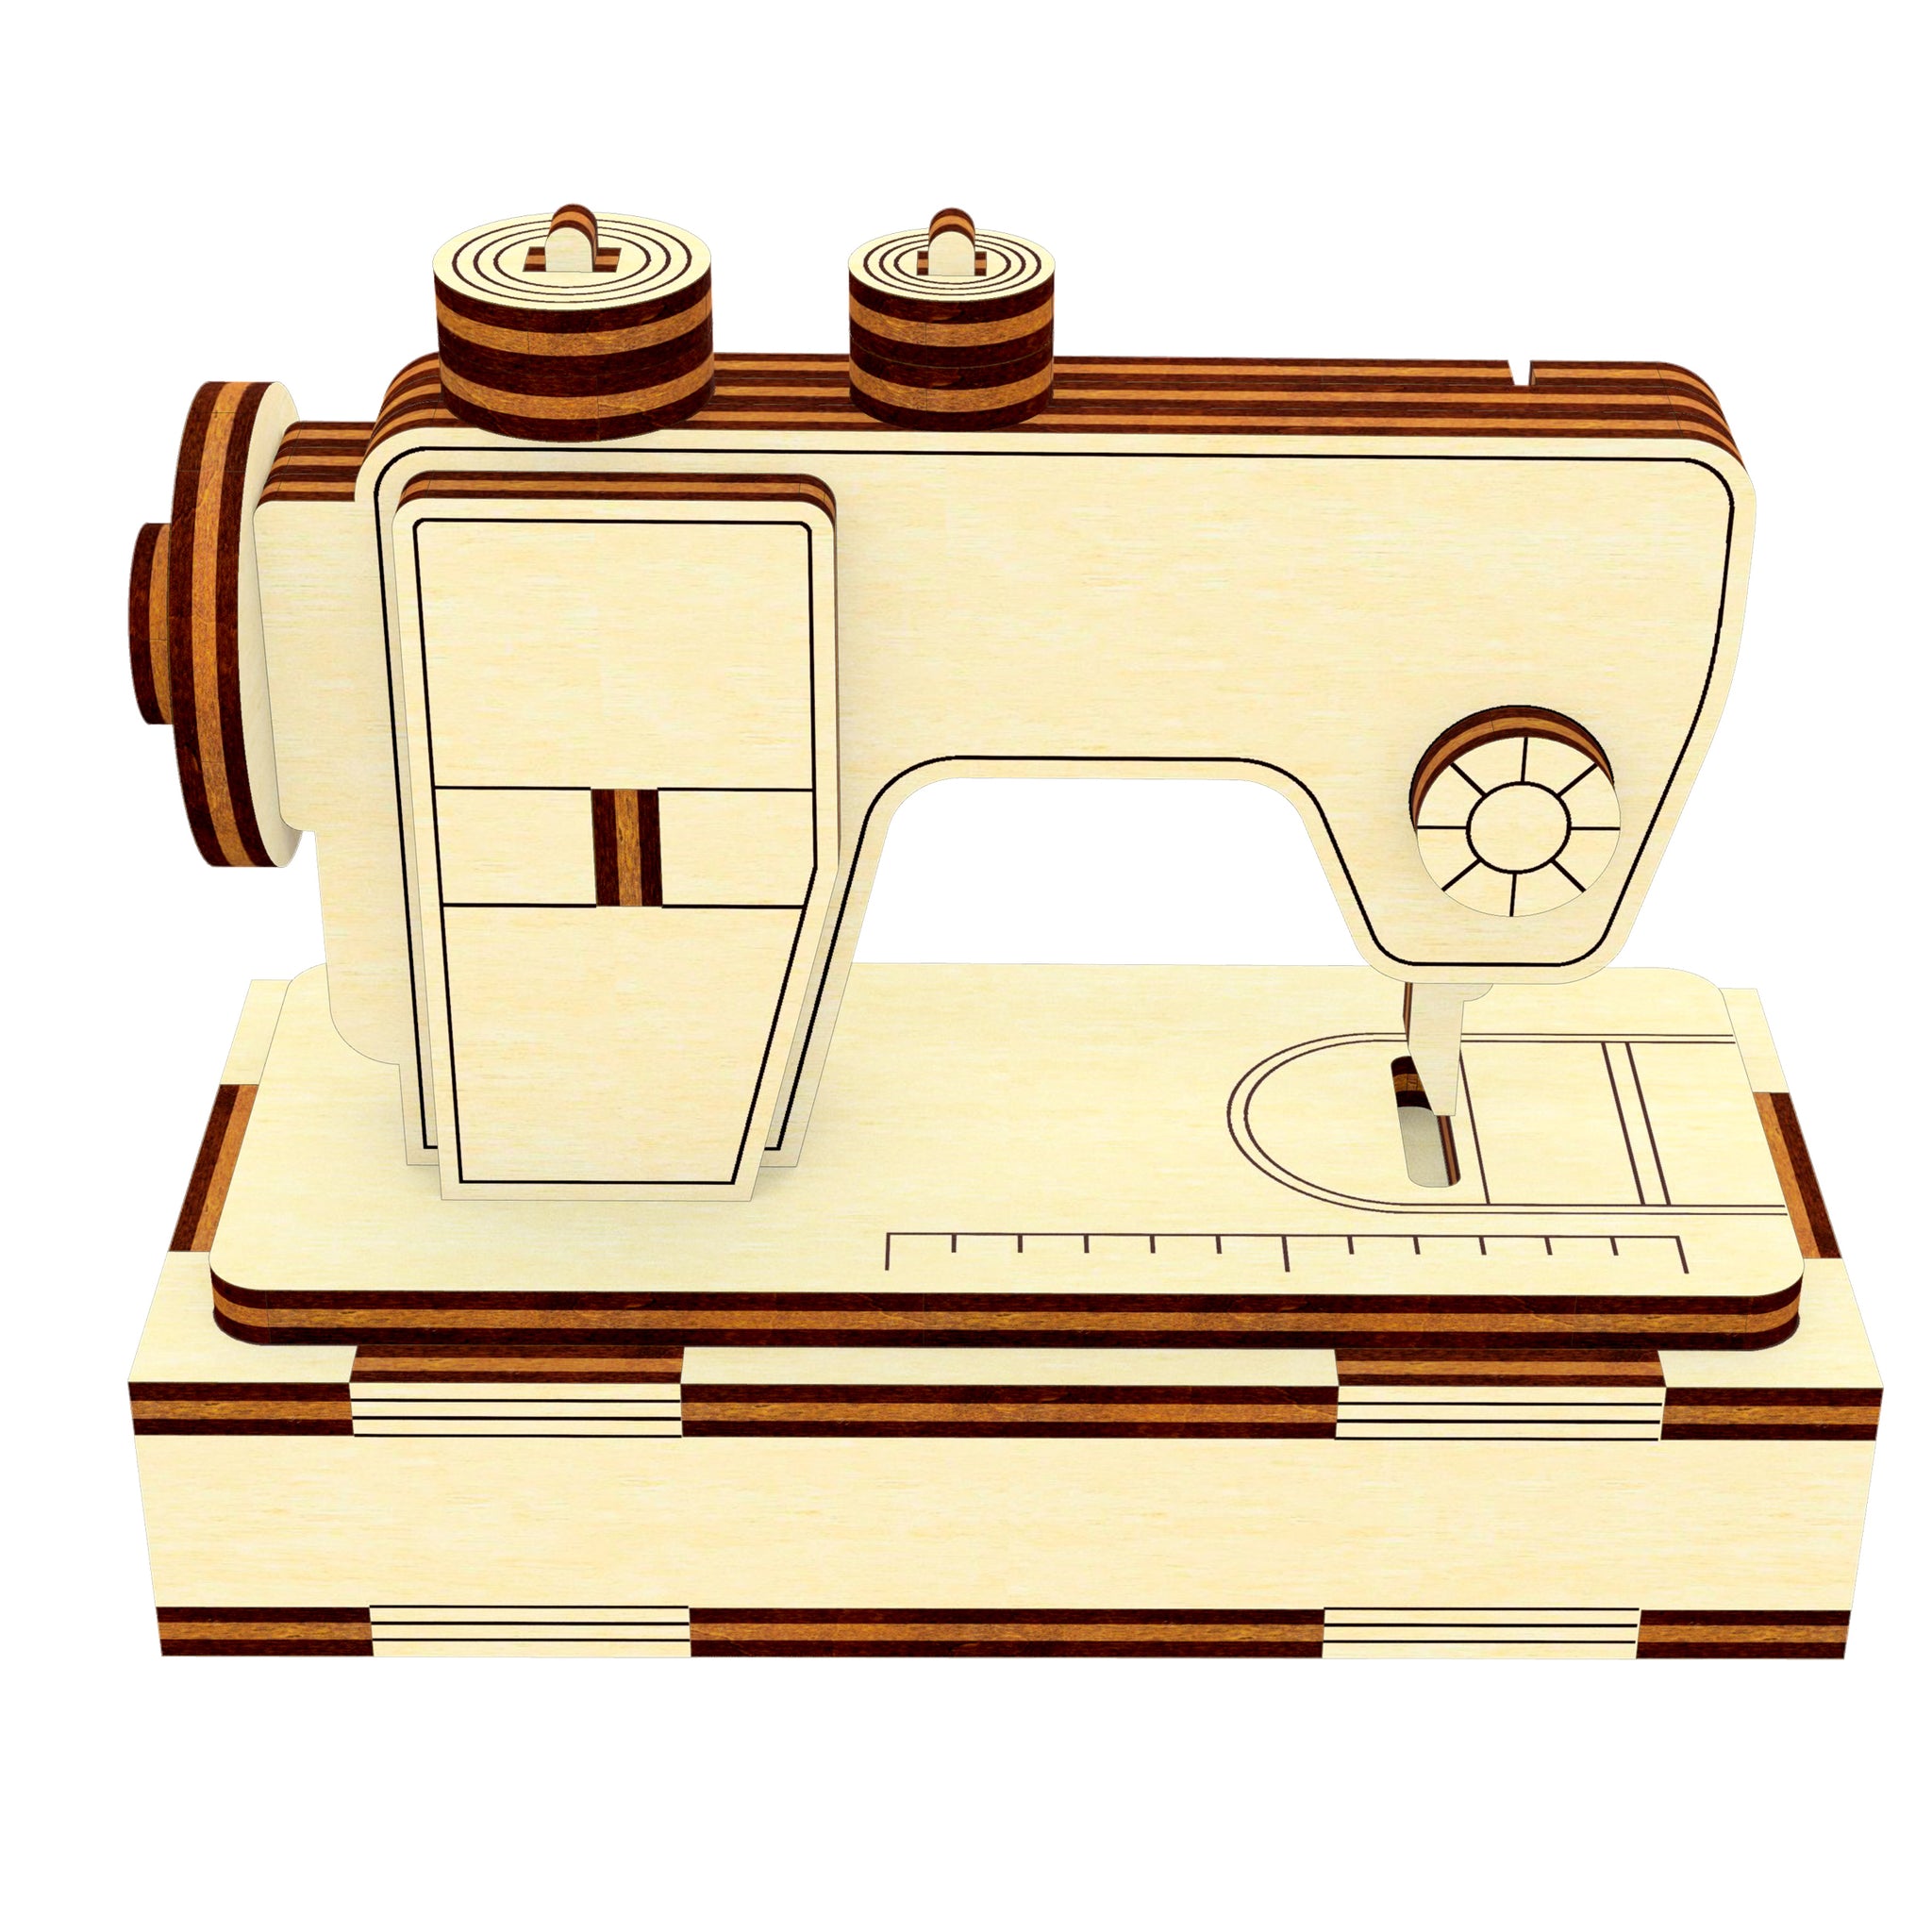 21,220 Modern Sewing Machine Images, Stock Photos, 3D objects, & Vectors